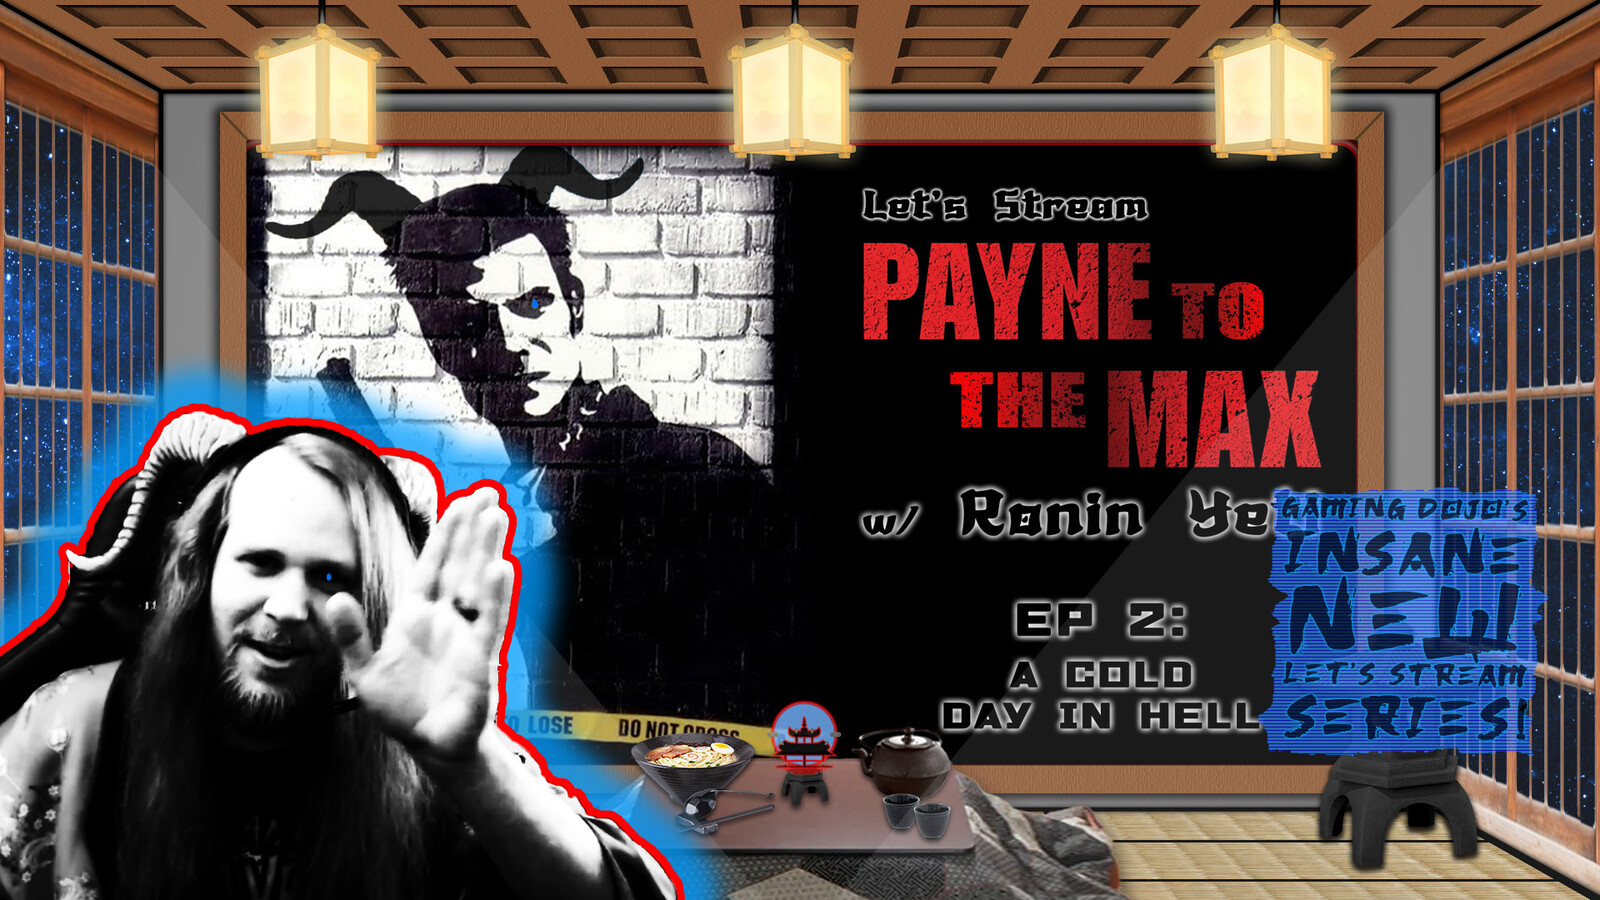 Let's Stream "Payne to the Max" Episode 2 Image | Ronin Yeti Twitch Streaming